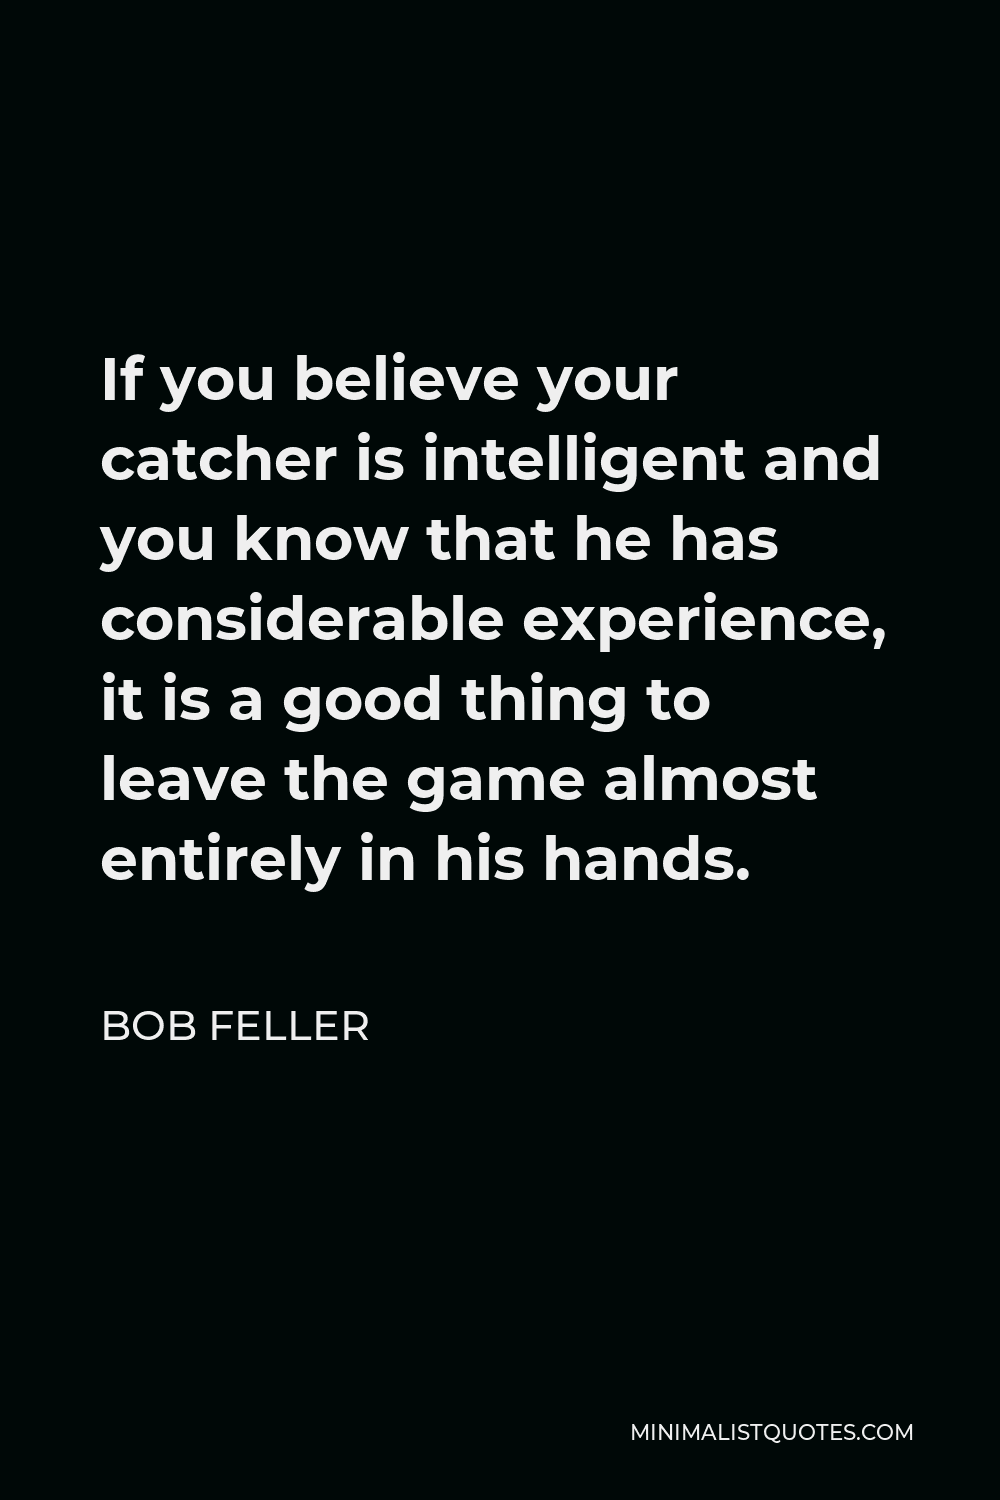 Bob Feller Quote - If you believe your catcher is intelligent and you know that he has considerable experience, it is a good thing to leave the game almost entirely in his hands.